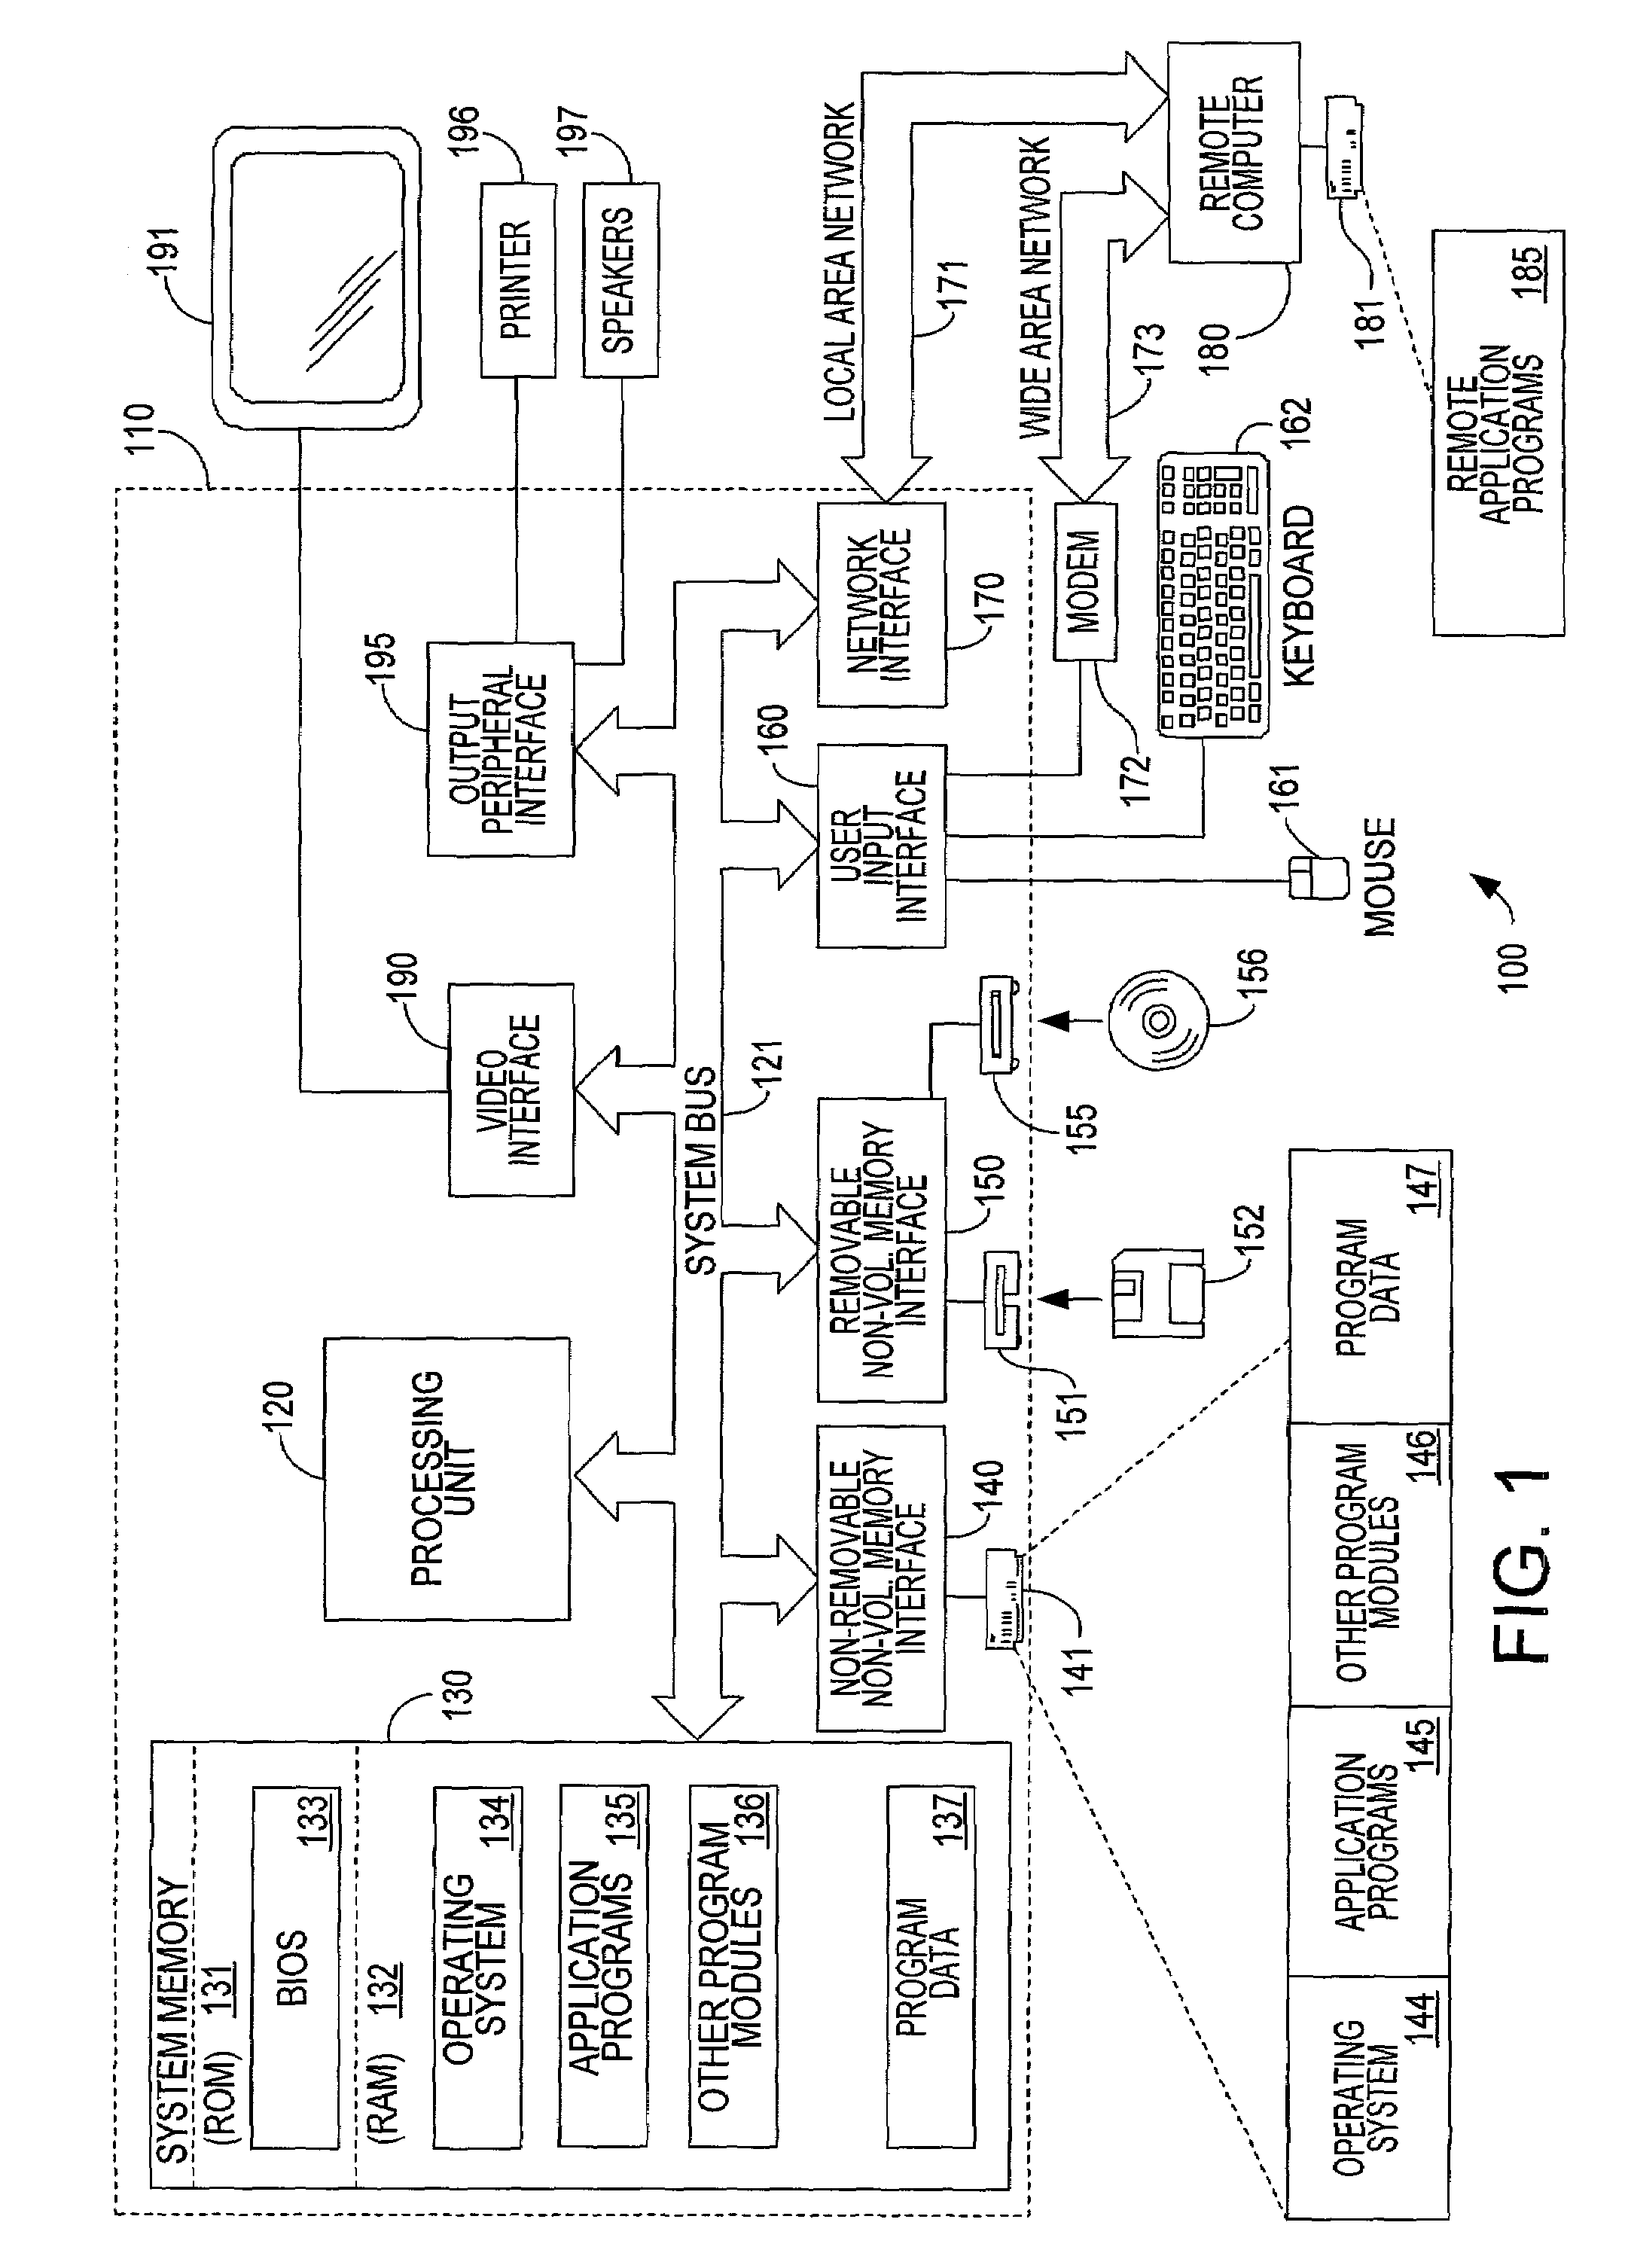 Peer-to-peer name resolution protocol (PNRP) security infrastructure and method